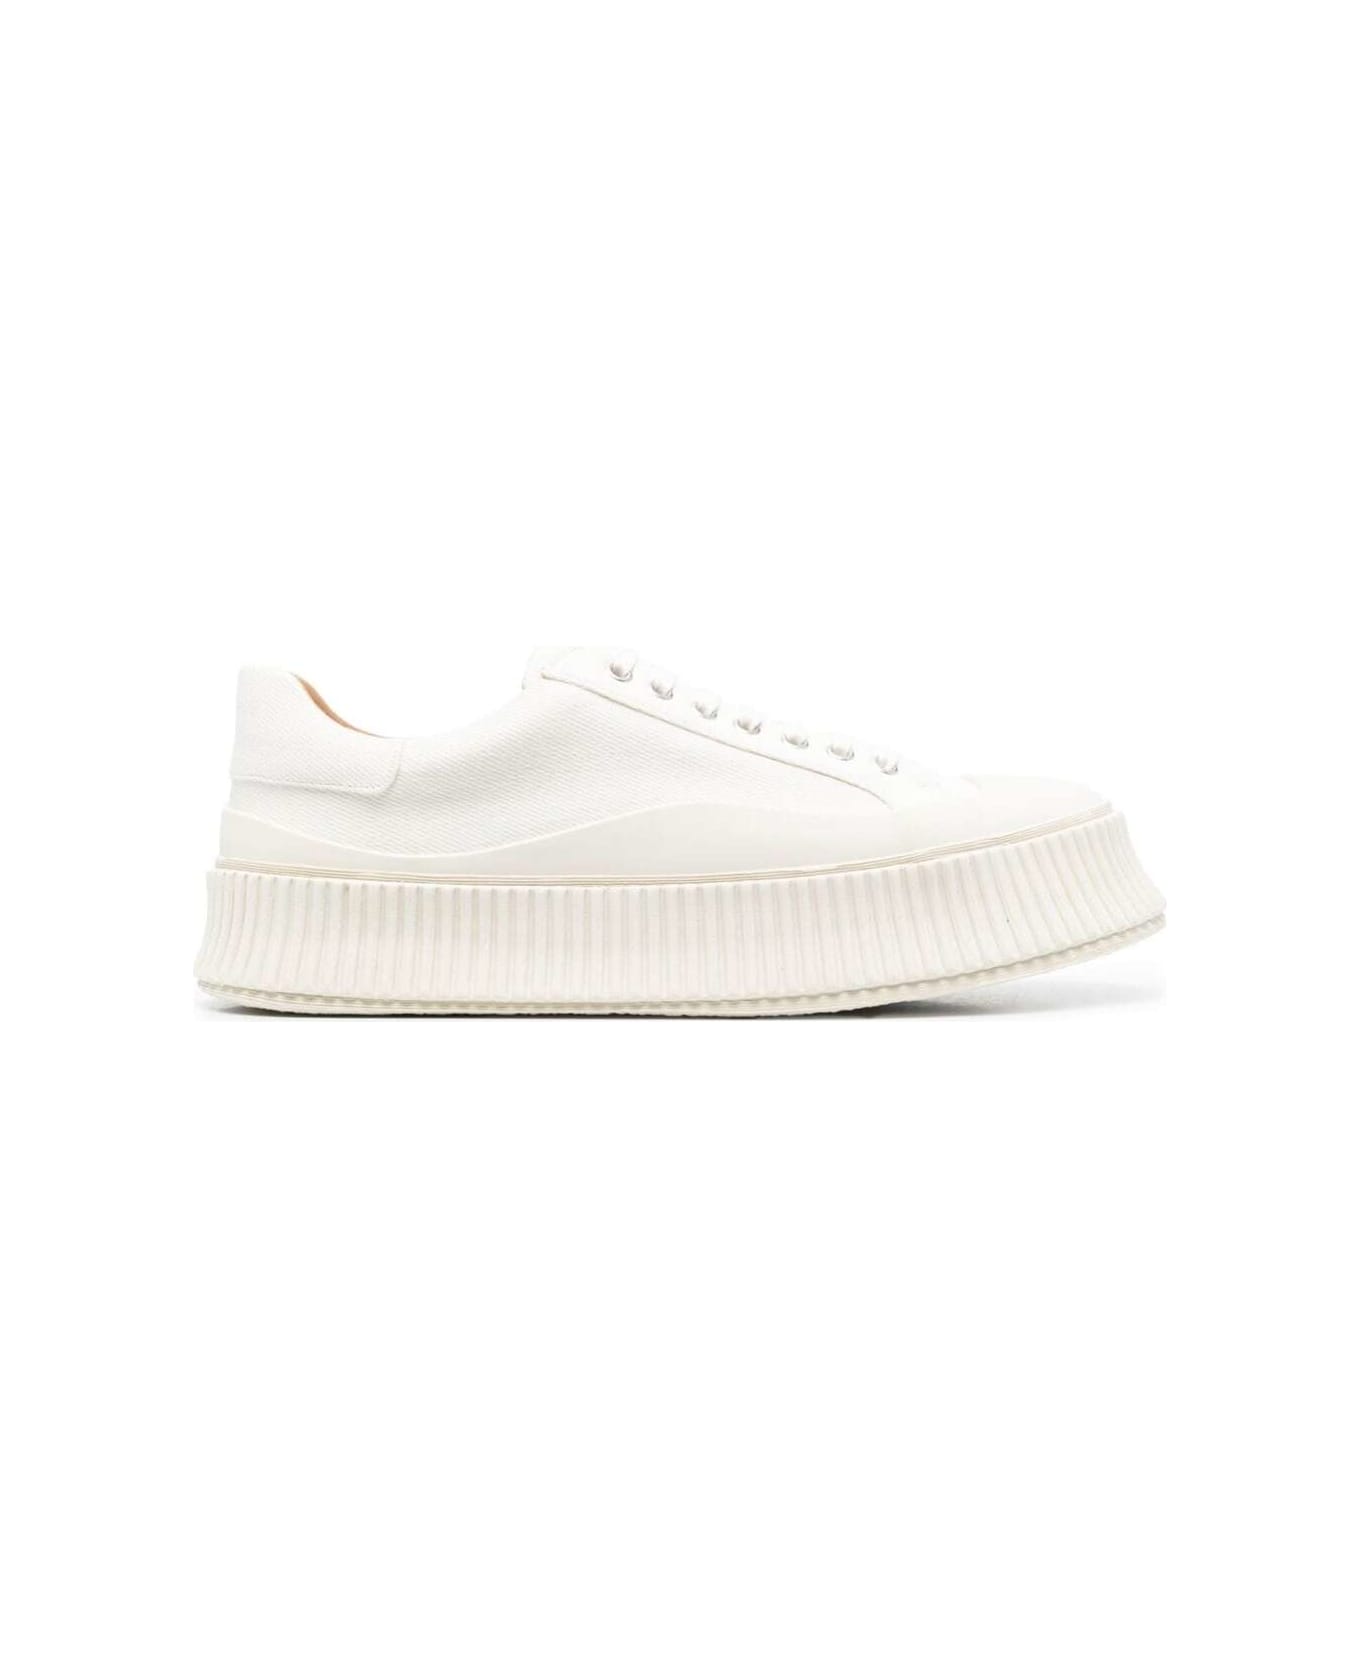 Jil Sander White Ridged Low Top Sneakers In Canvas And Leather Man - White スニーカー